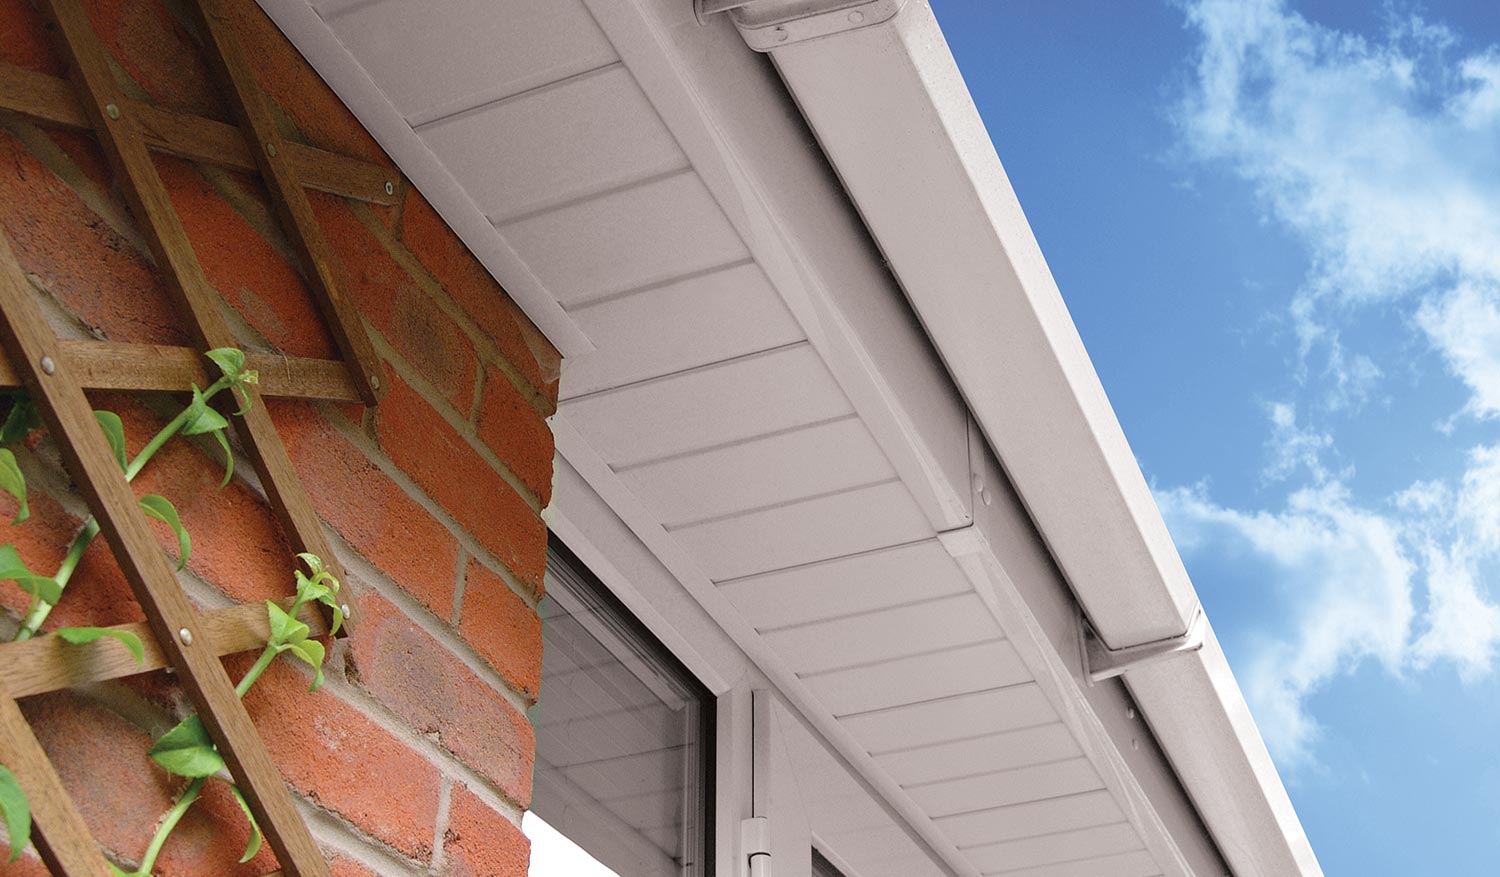 Fascias, Soffits and Guttering Services in Sutton Coldfield, Great Barr, Birmingham